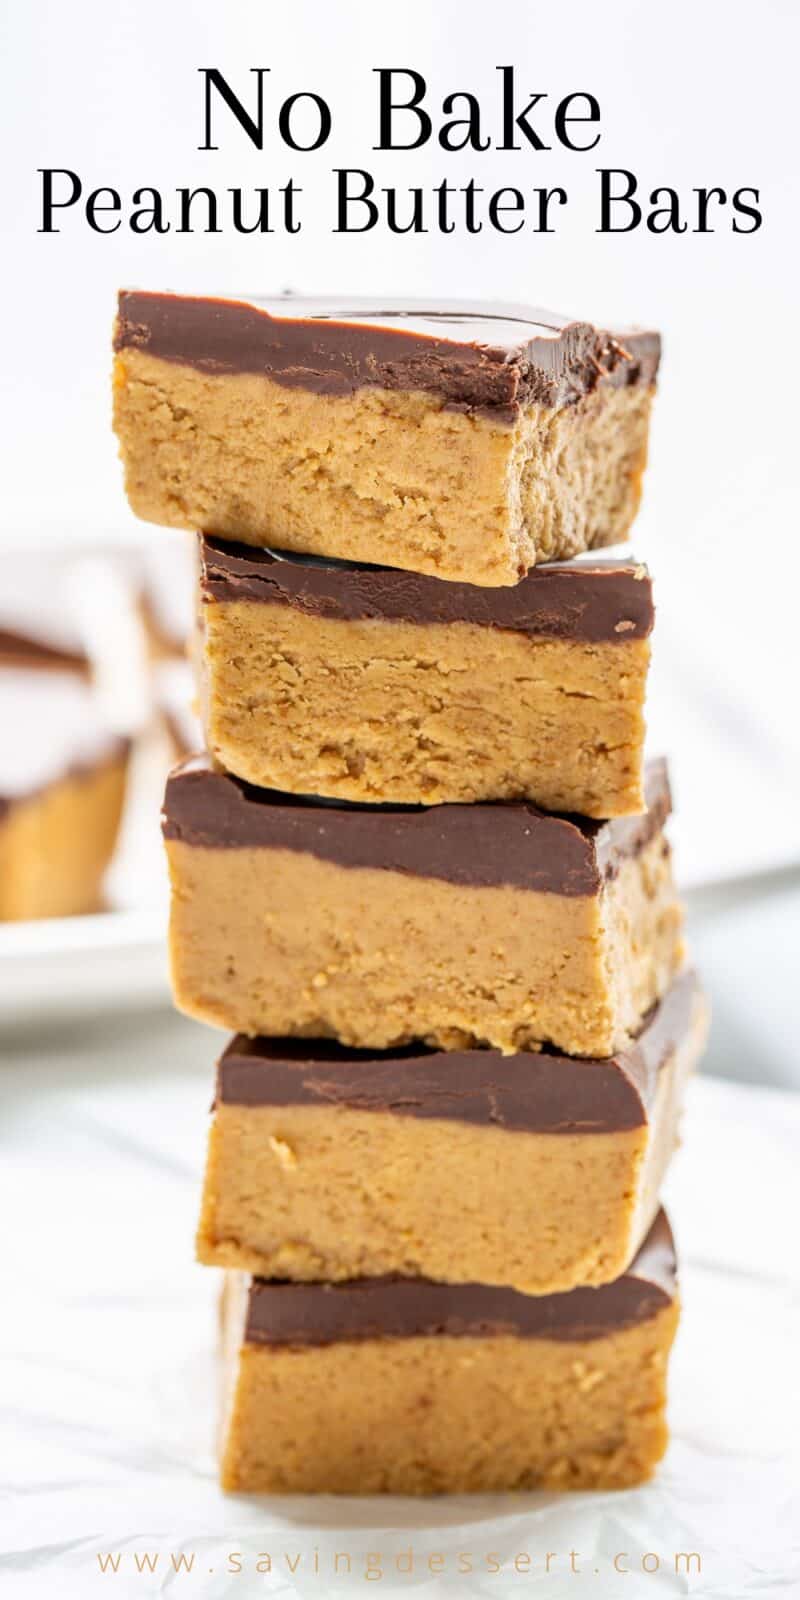 A stack of no bake peanut butter bars topped with chocolate